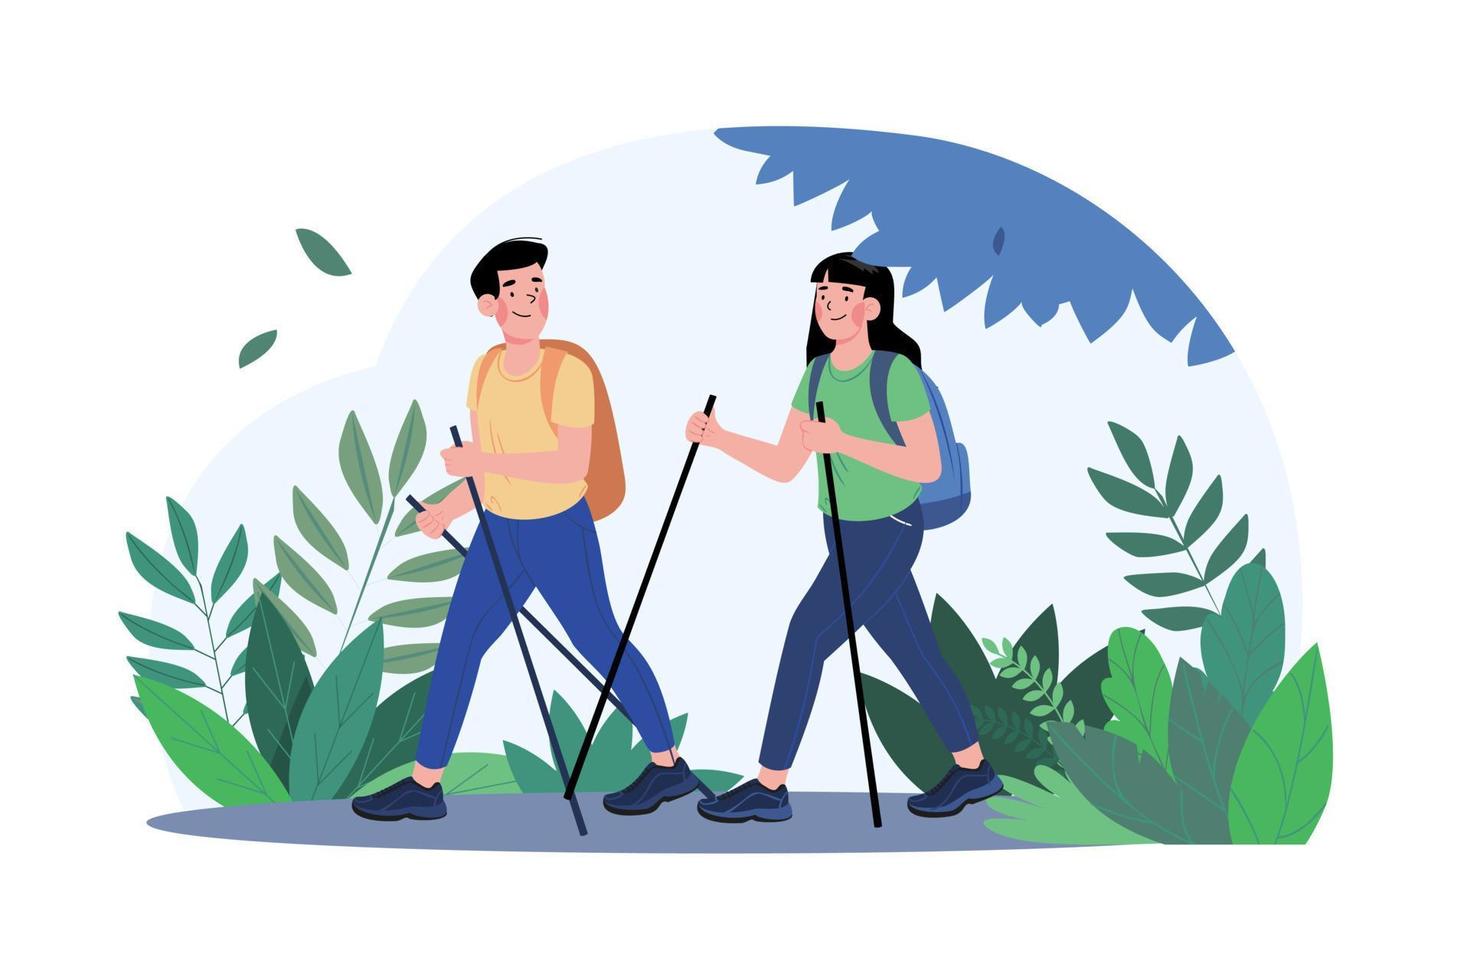 Couple Walking In The Forest Illustration concept on white background vector